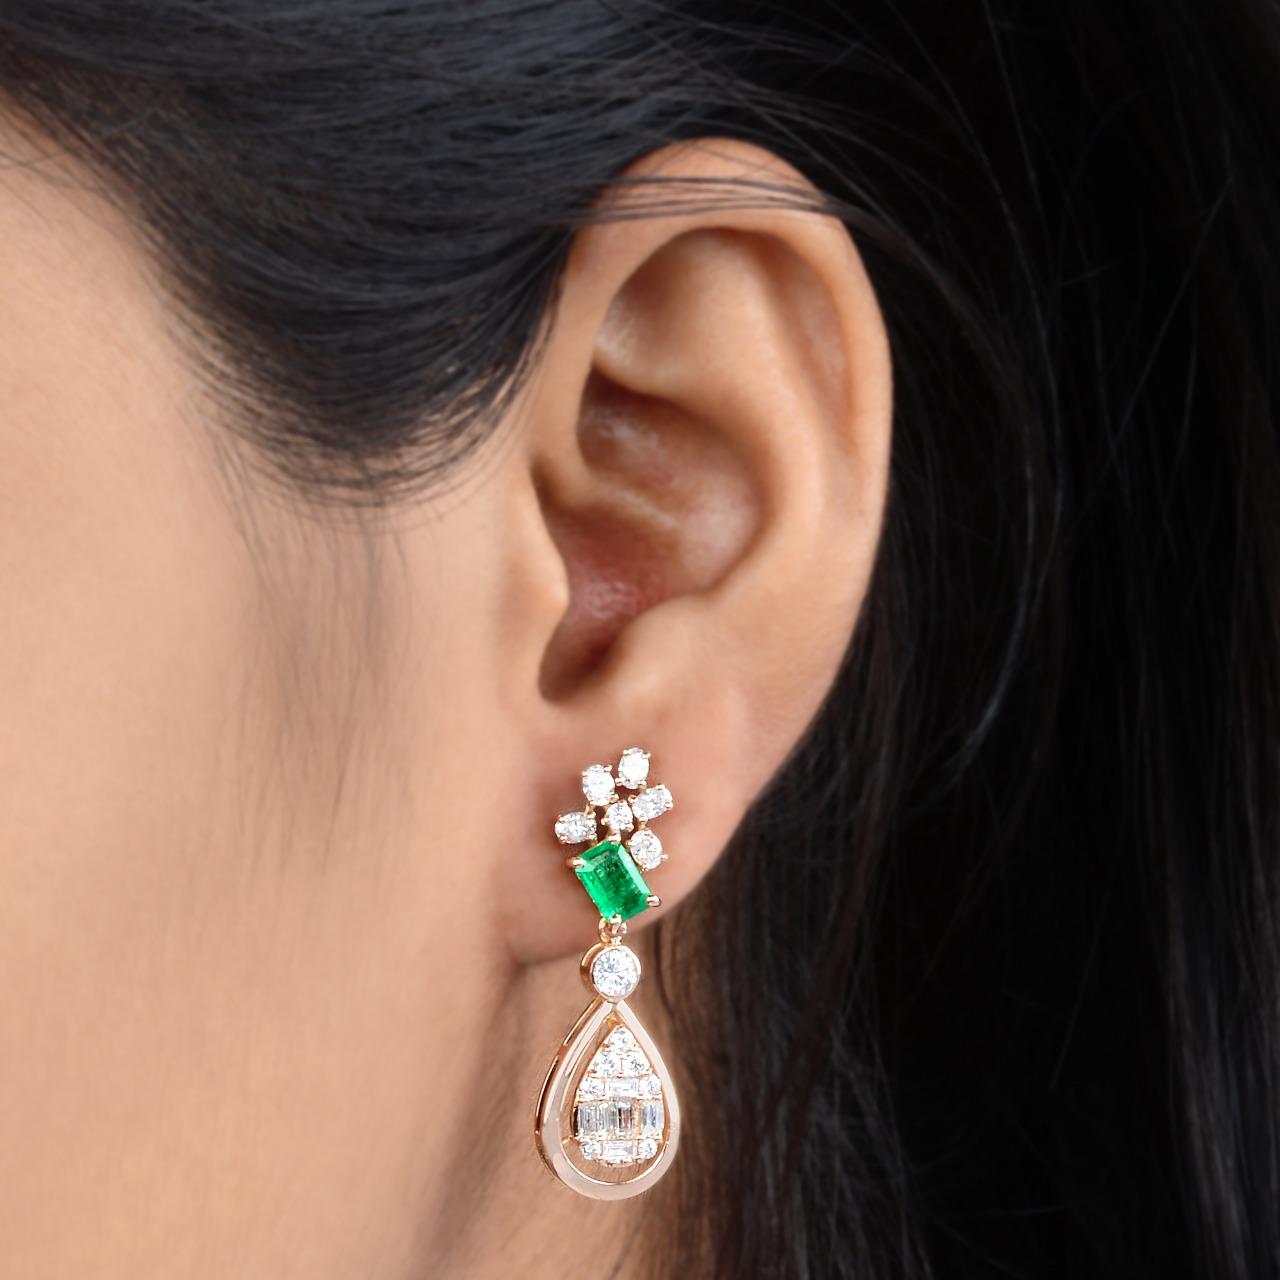 Cast in 14 karat gold, these beautiful earrings are hand set with .96 carats emerald and 1.60 carats of glimmering diamonds. 

FOLLOW MEGHNA JEWELS storefront to view the latest collection & exclusive pieces. Meghna Jewels is proudly rated as a Top